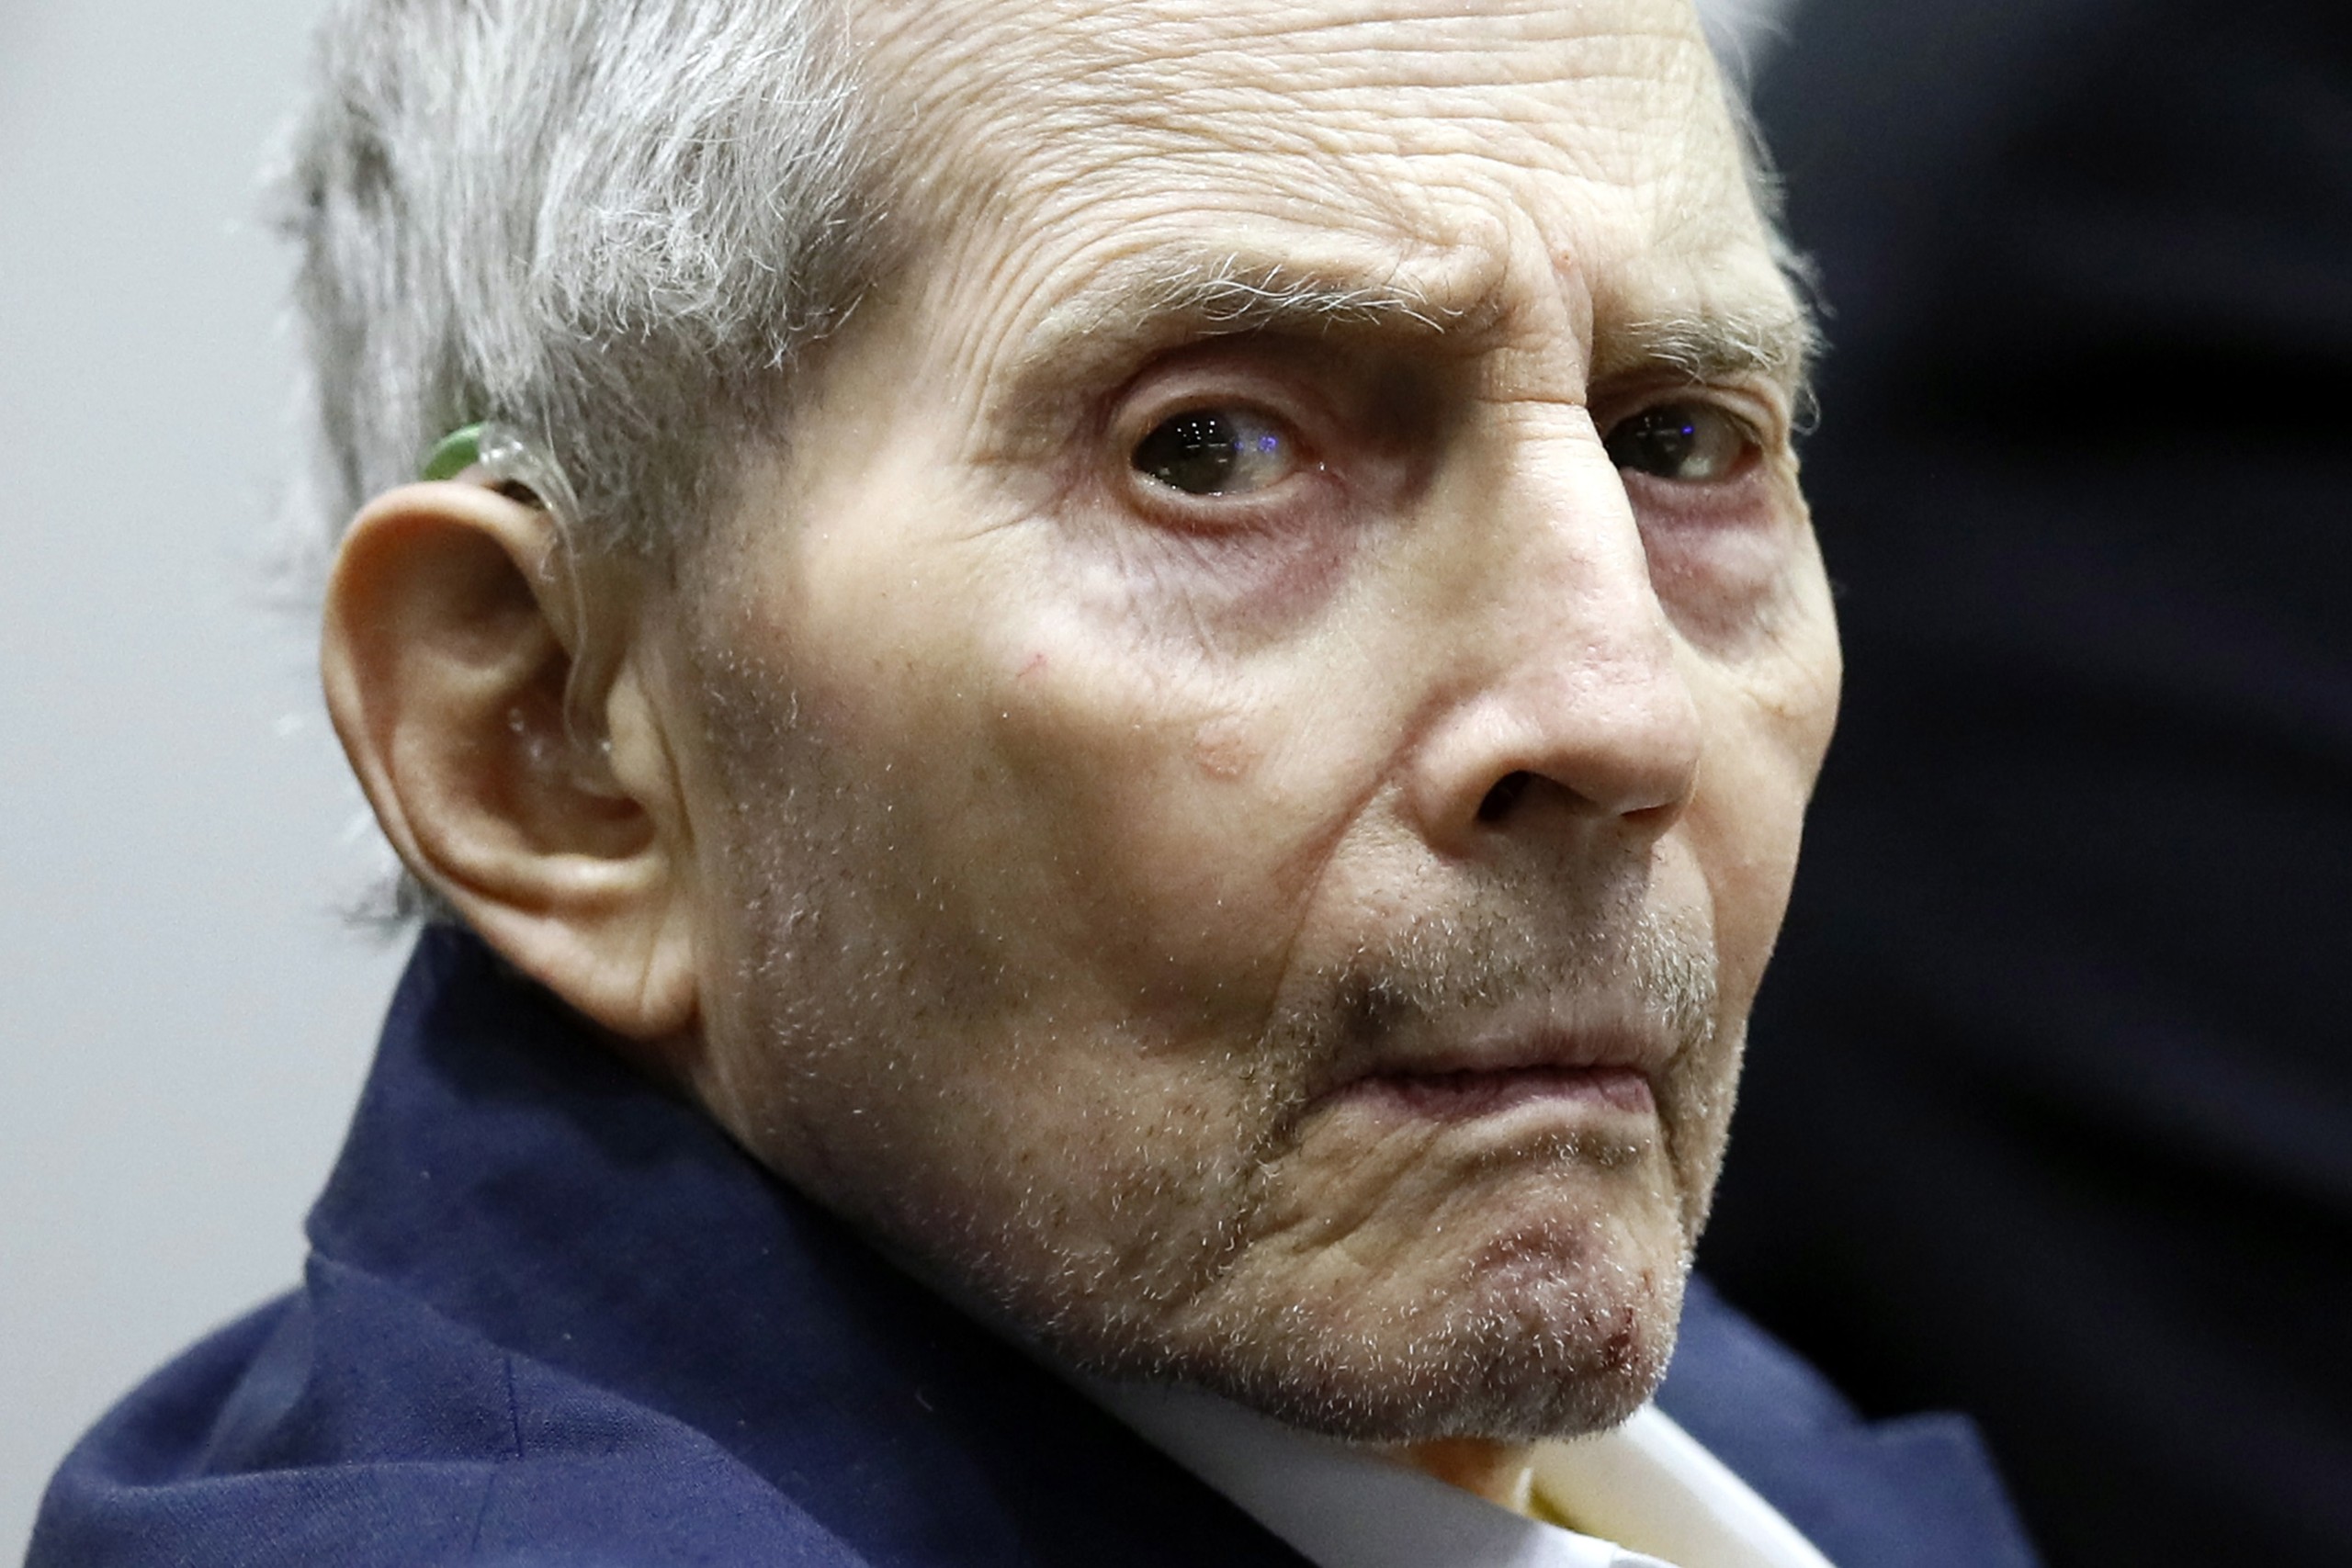 epa09677586 (FILE) - Robert Durst appears during the opening statements of his Trial at the Airport courthouse in Los Angeles, California, USA, 04 March 2020 (Reissued 10 January 2022). Robert Durst died at the age of 78 on 10 January 2022.  EPA/ETIENNE LAURENT / POOL *** Local Caption *** 55928390